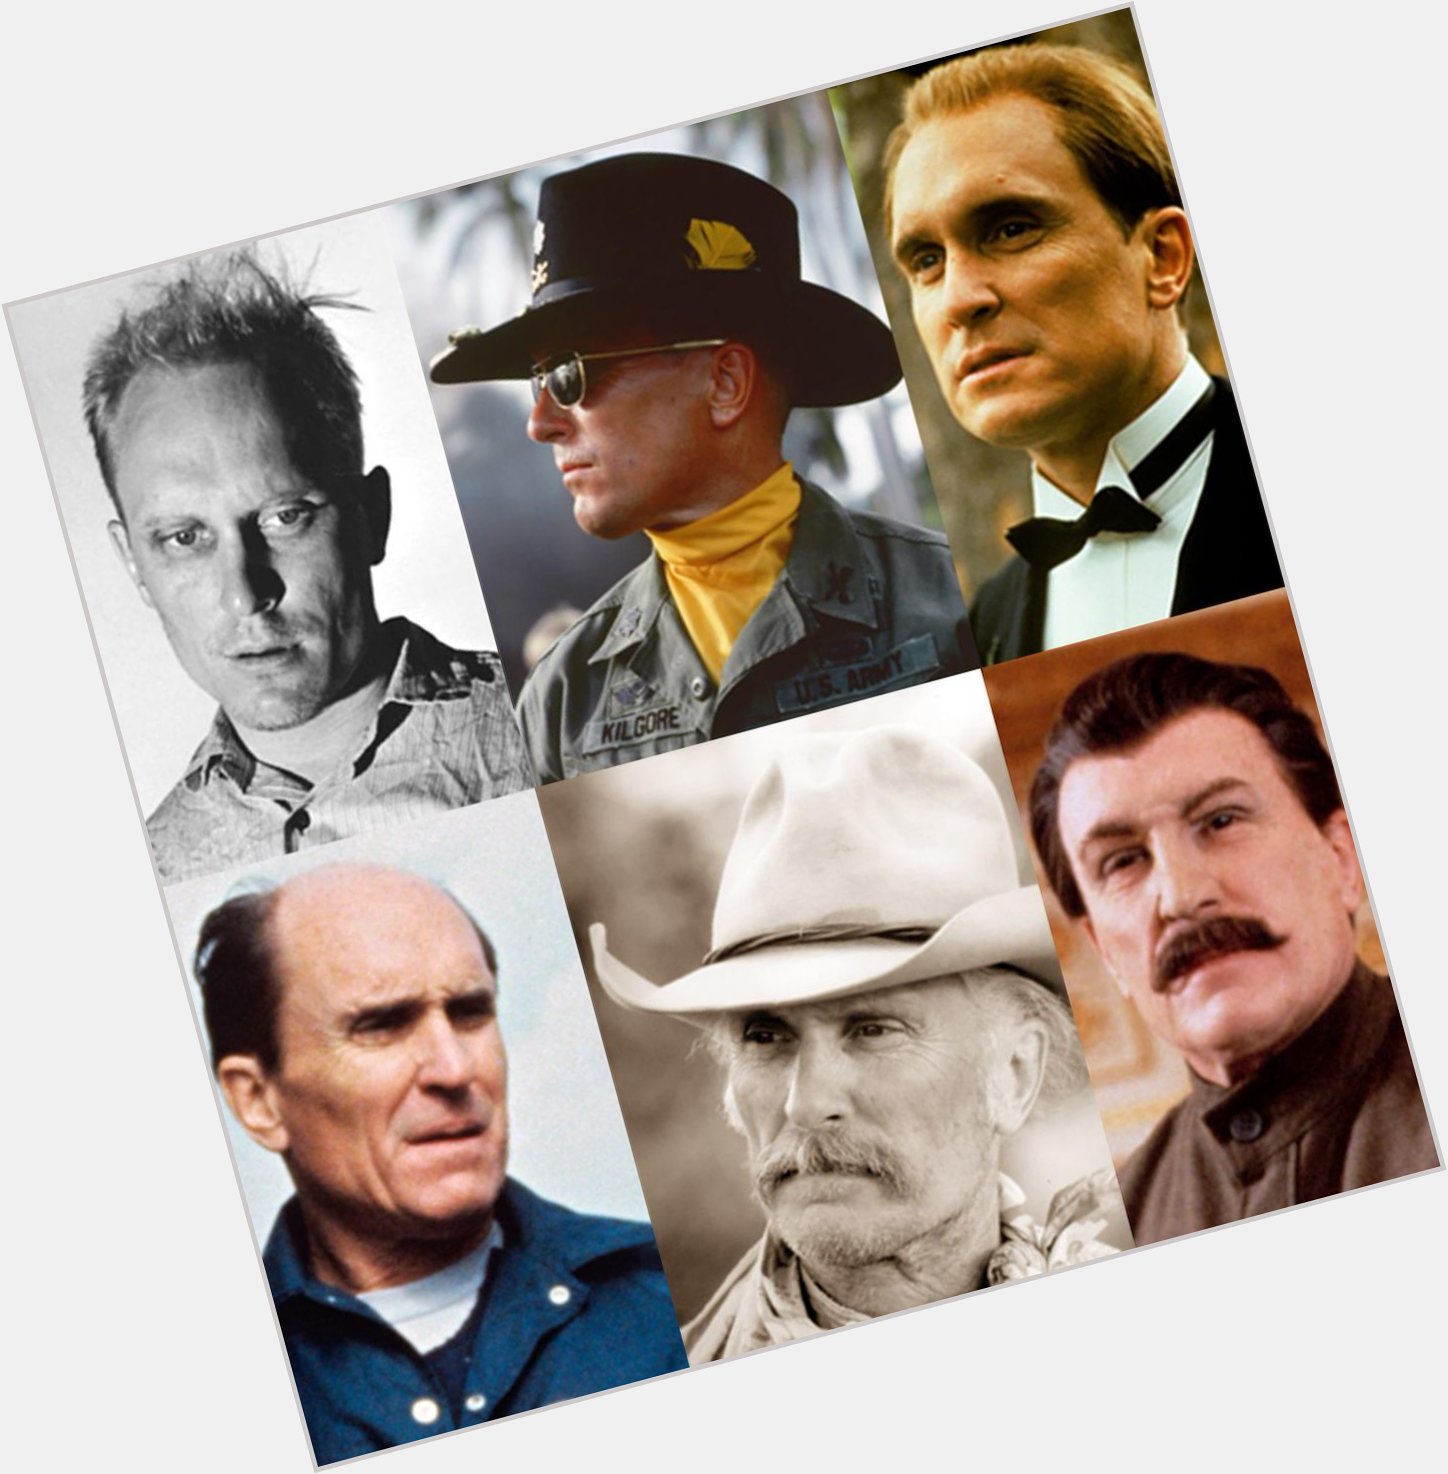 Happy 90th Birthday to Robert Duvall. You are truly one of the greatest actors! 